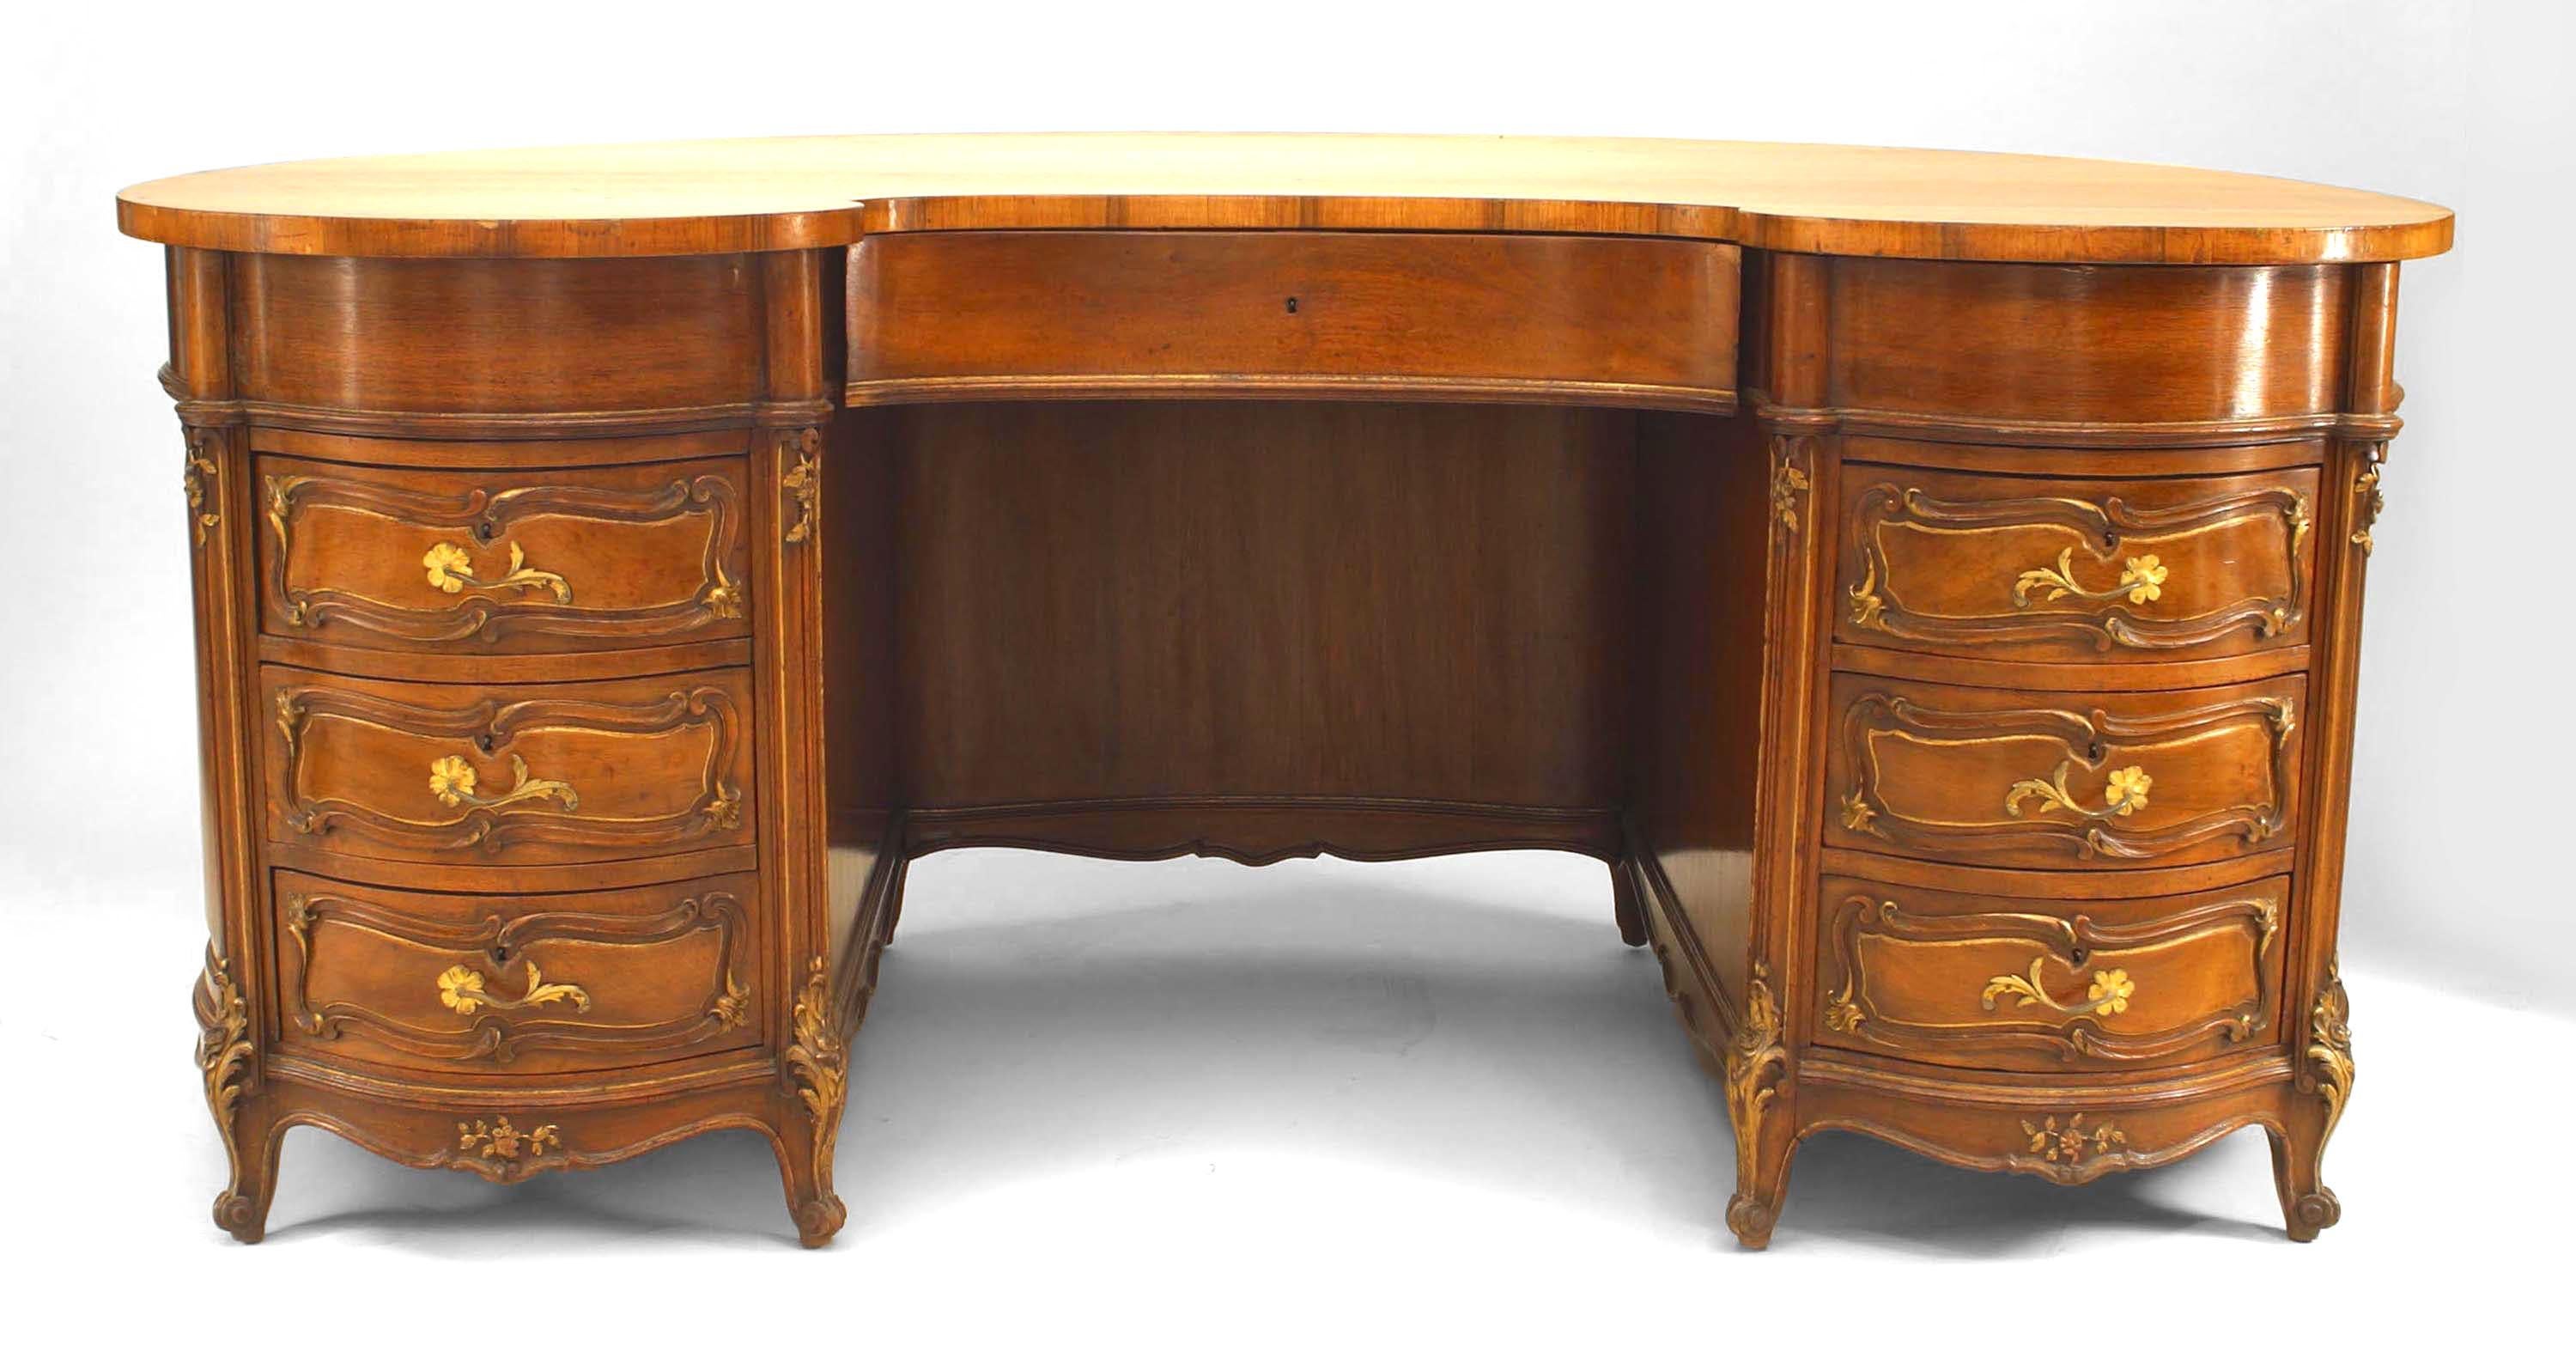 19th century French Louis XV style walnut kidney shaped kneehole desk with gilt trim and brass scroll handles.